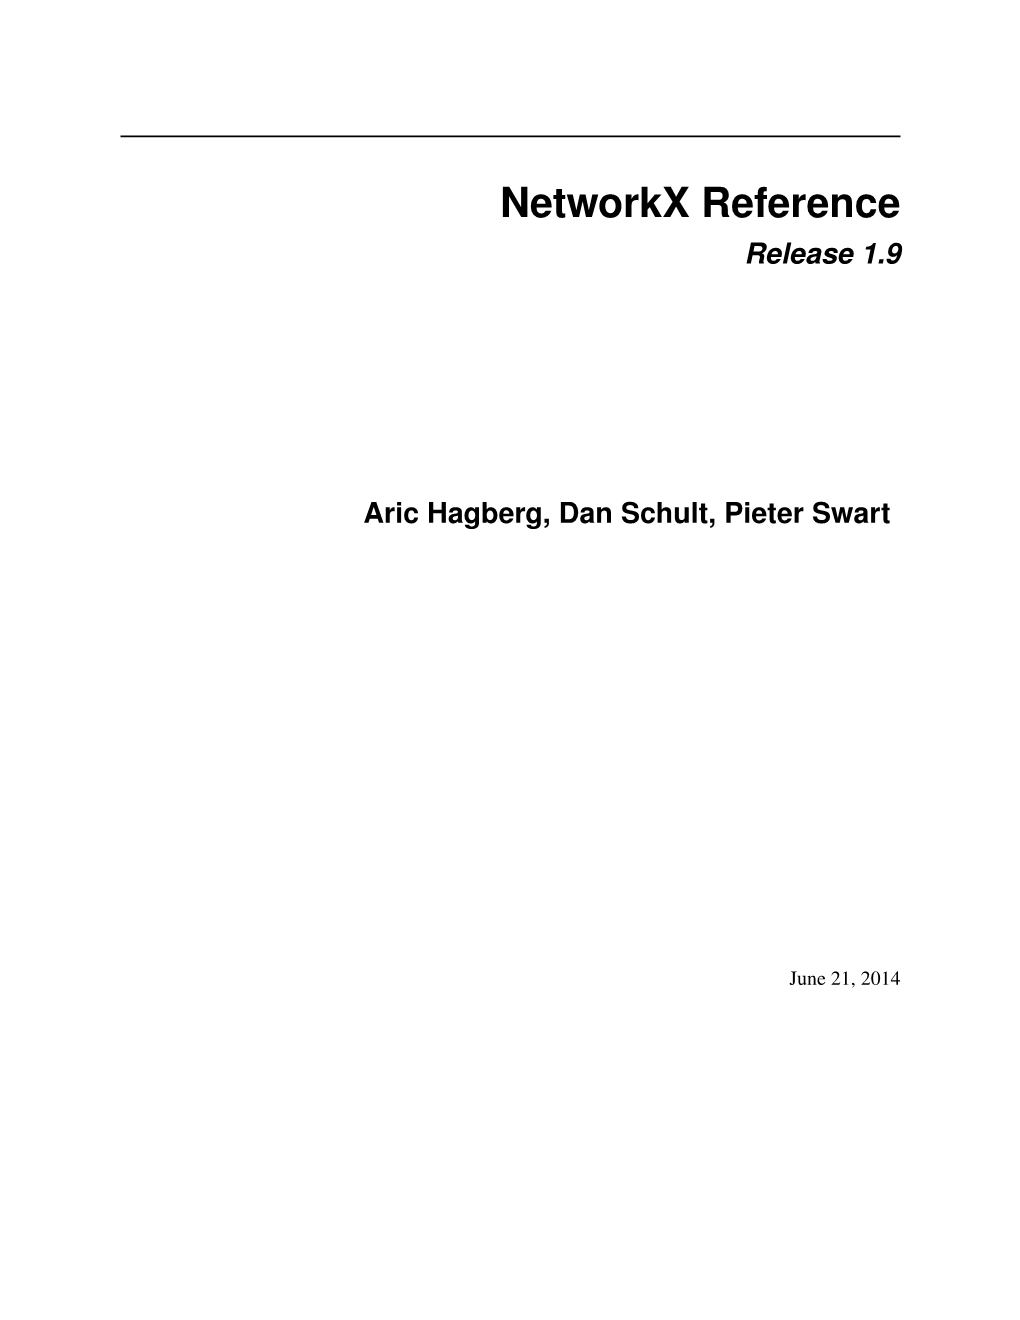 Networkx Reference Release 1.9